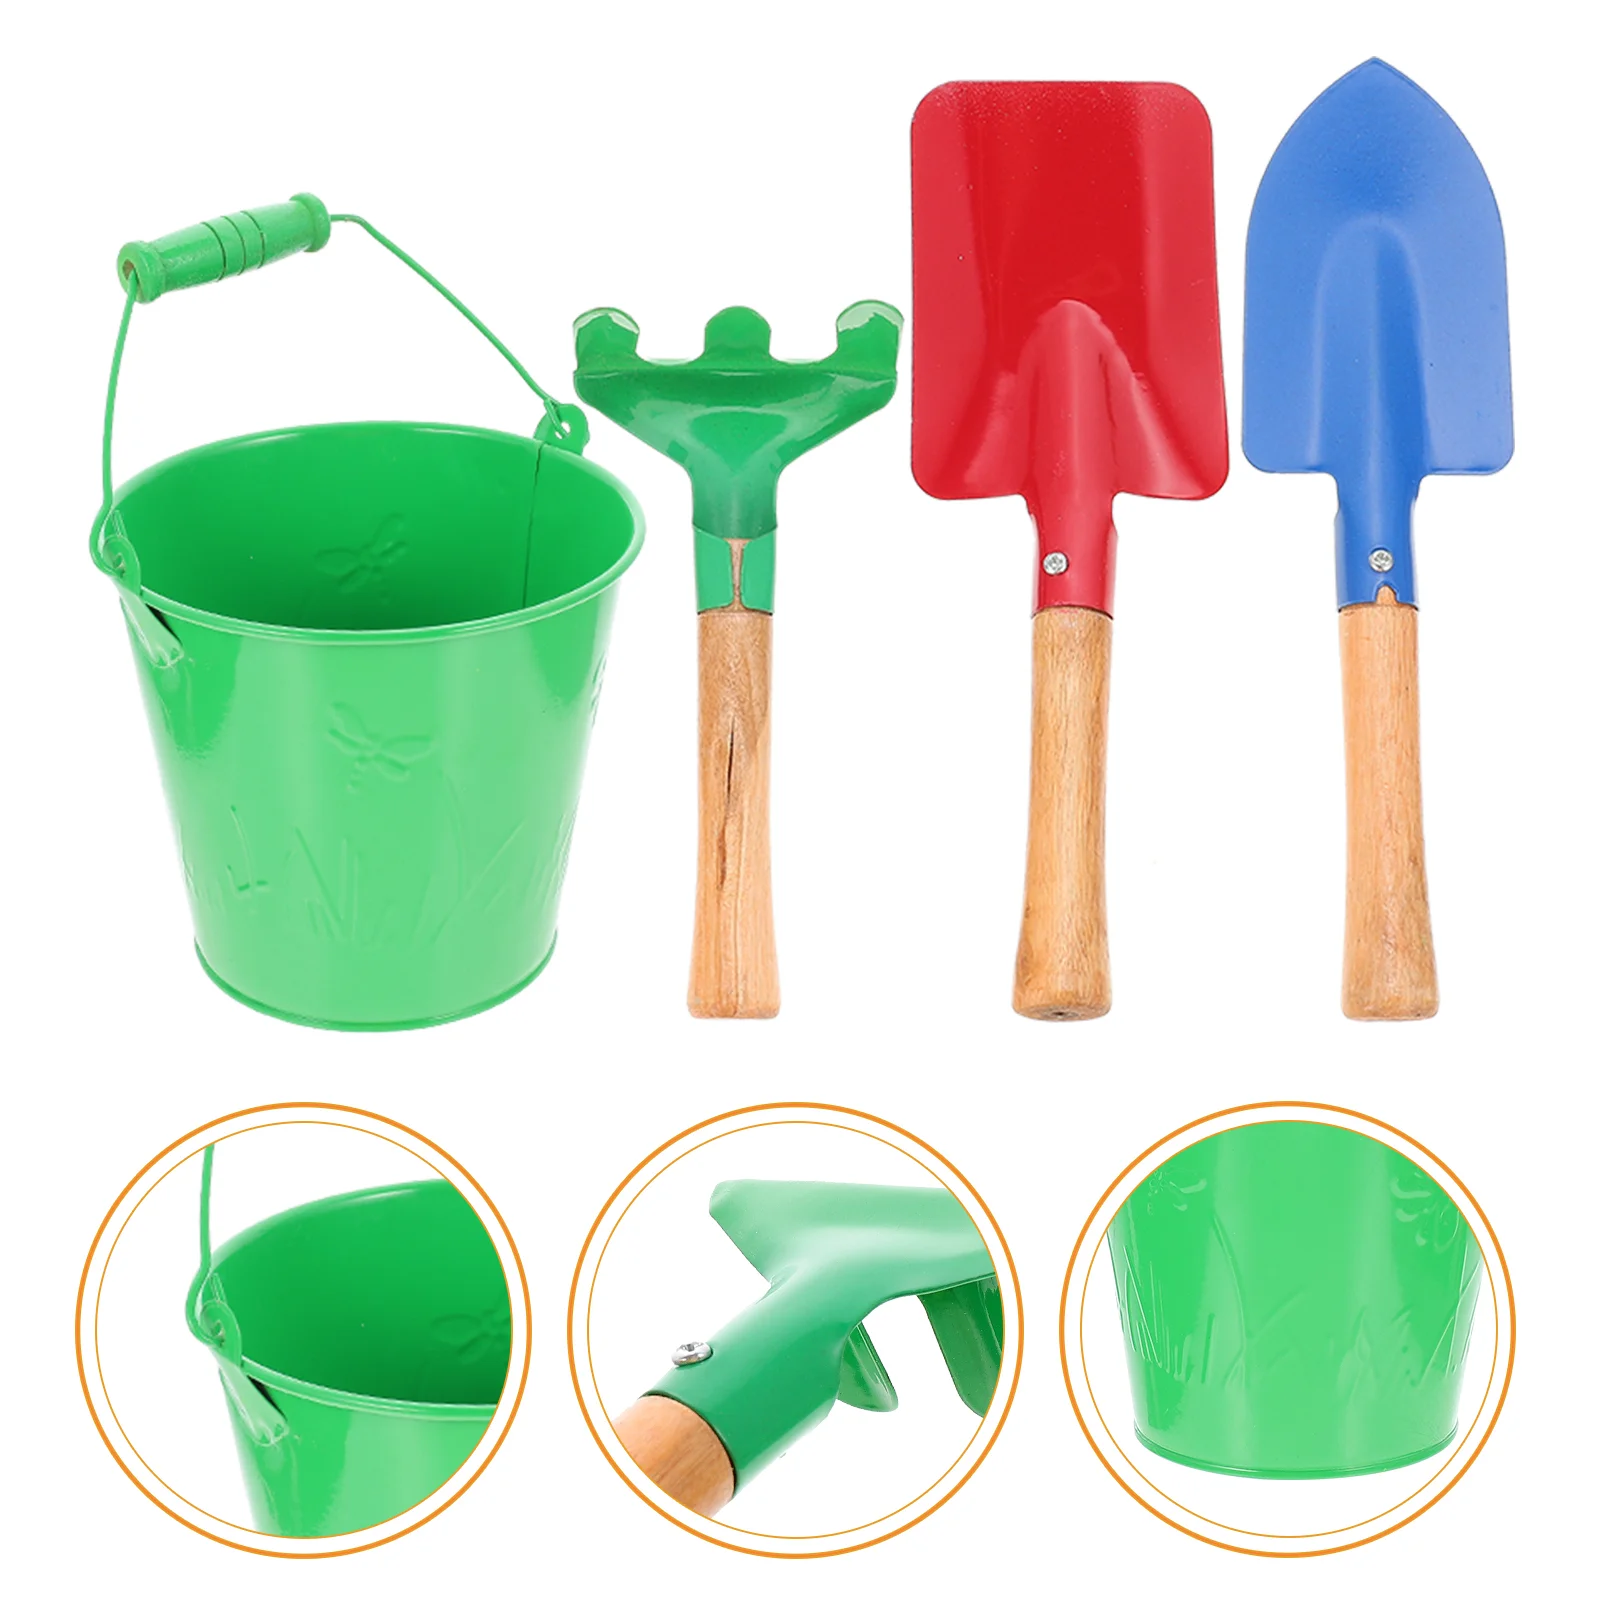 

Gardening Sand Toys Kids Shovels Tool for Children Hand Tools Planting Playing with Beach Bucket Wood Toddler Rake